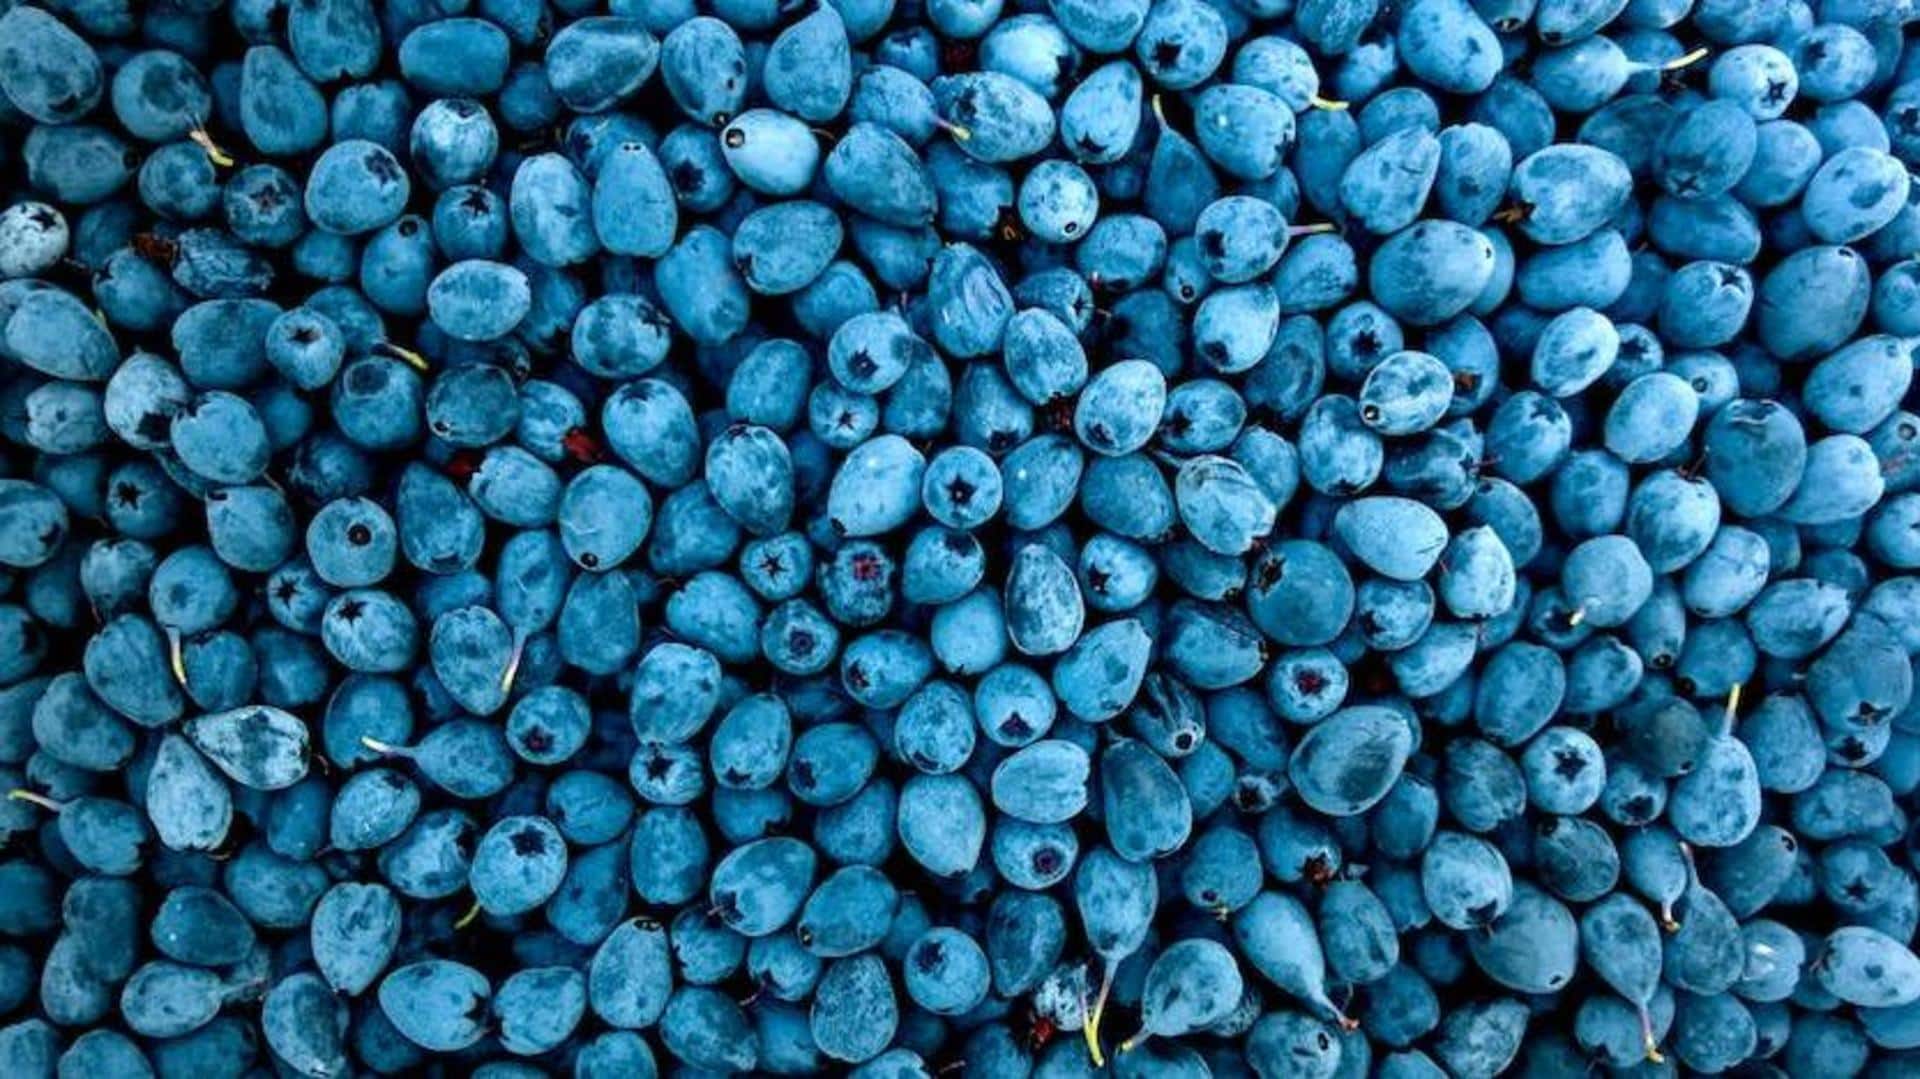 National Blueberry Month: Homemade facemasks using this fruit